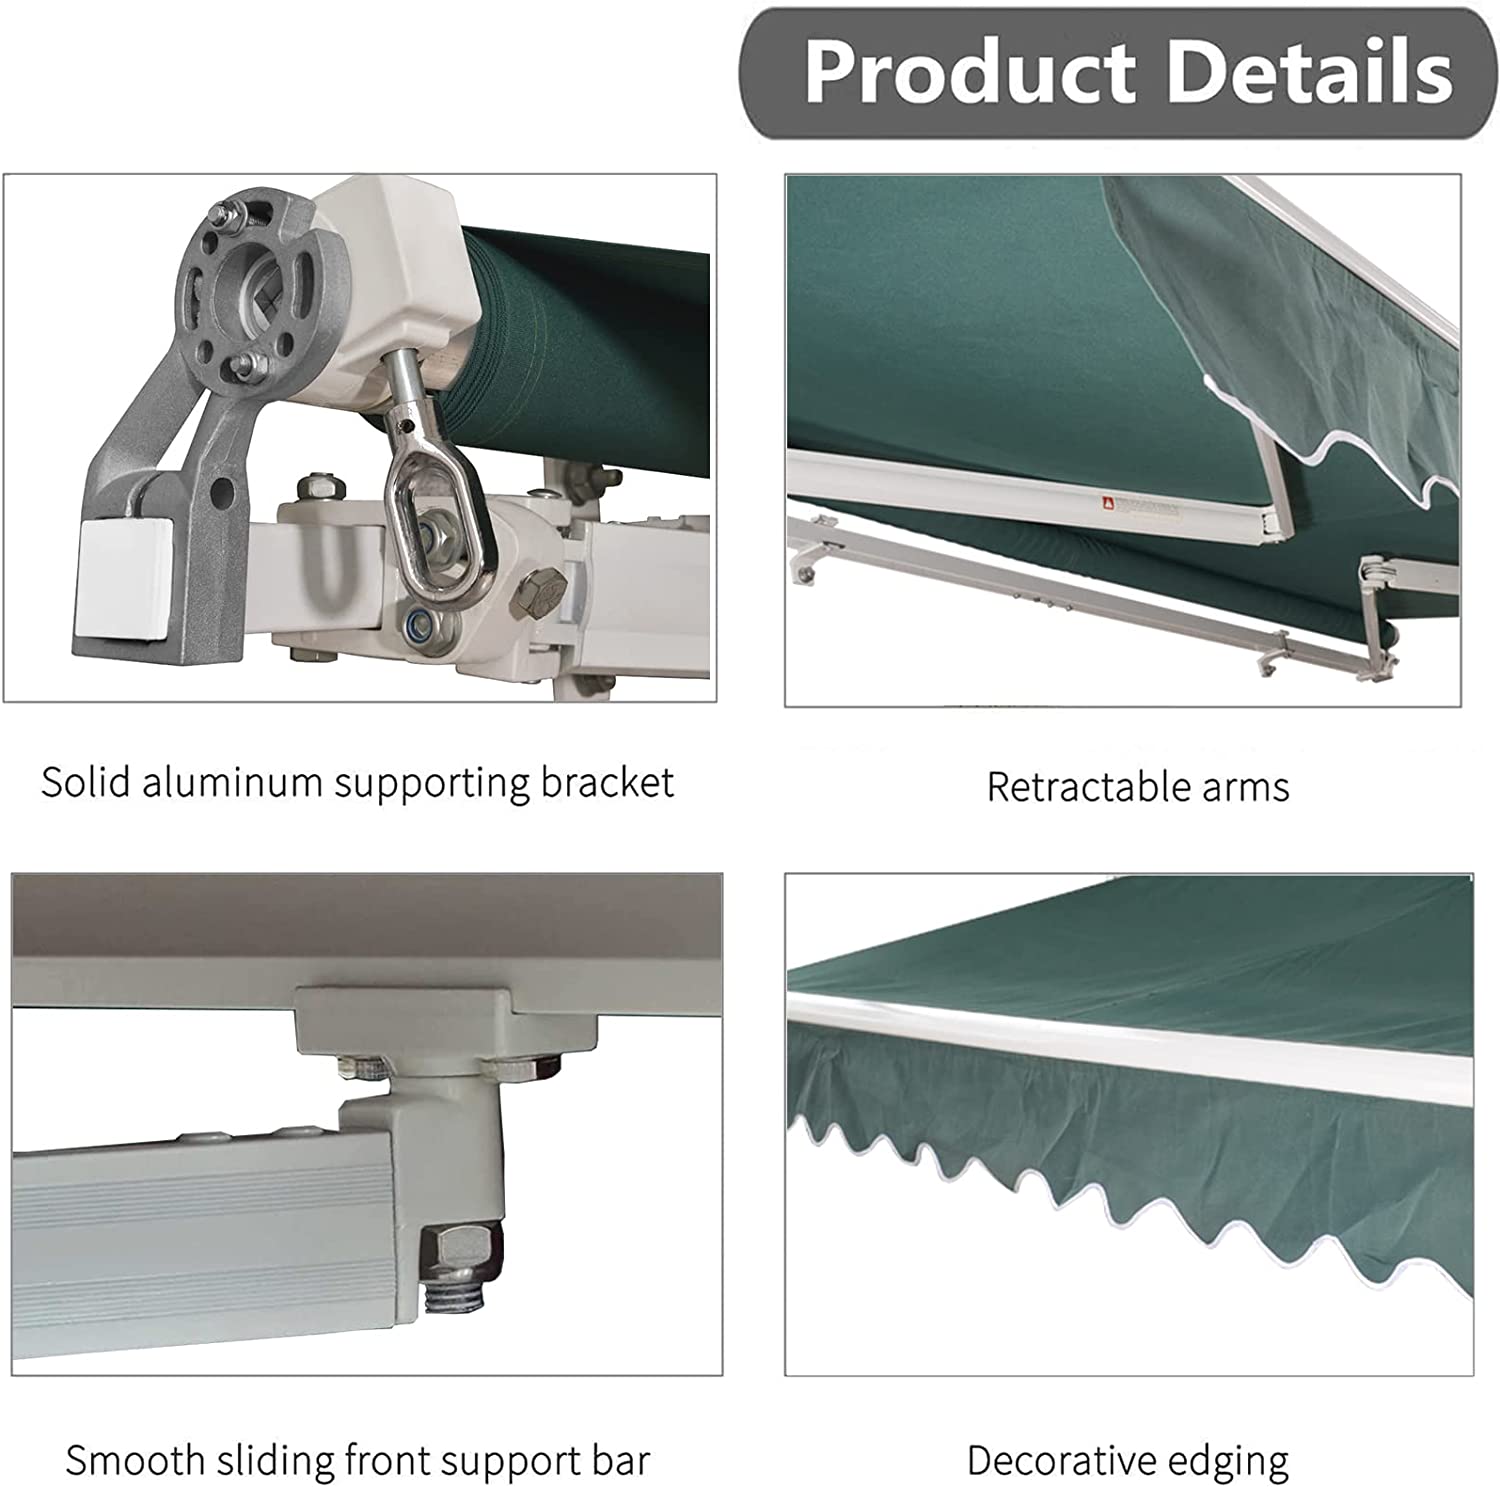 diy retractable awning